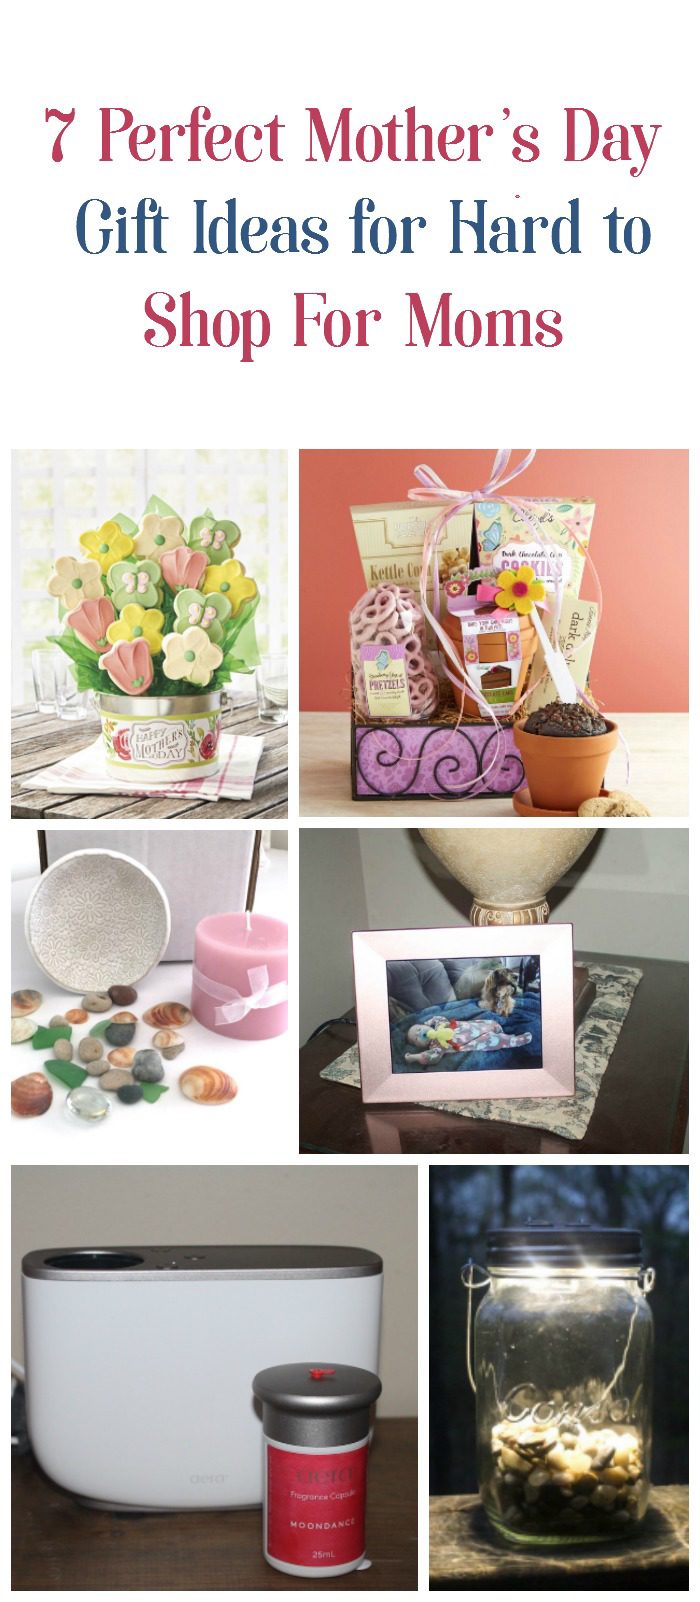 As a mom who is notoriously hard to shop for, I can honestly say I'd love any of these 7 incredibly neat & original Mother's Day gift ideas! Check them out!